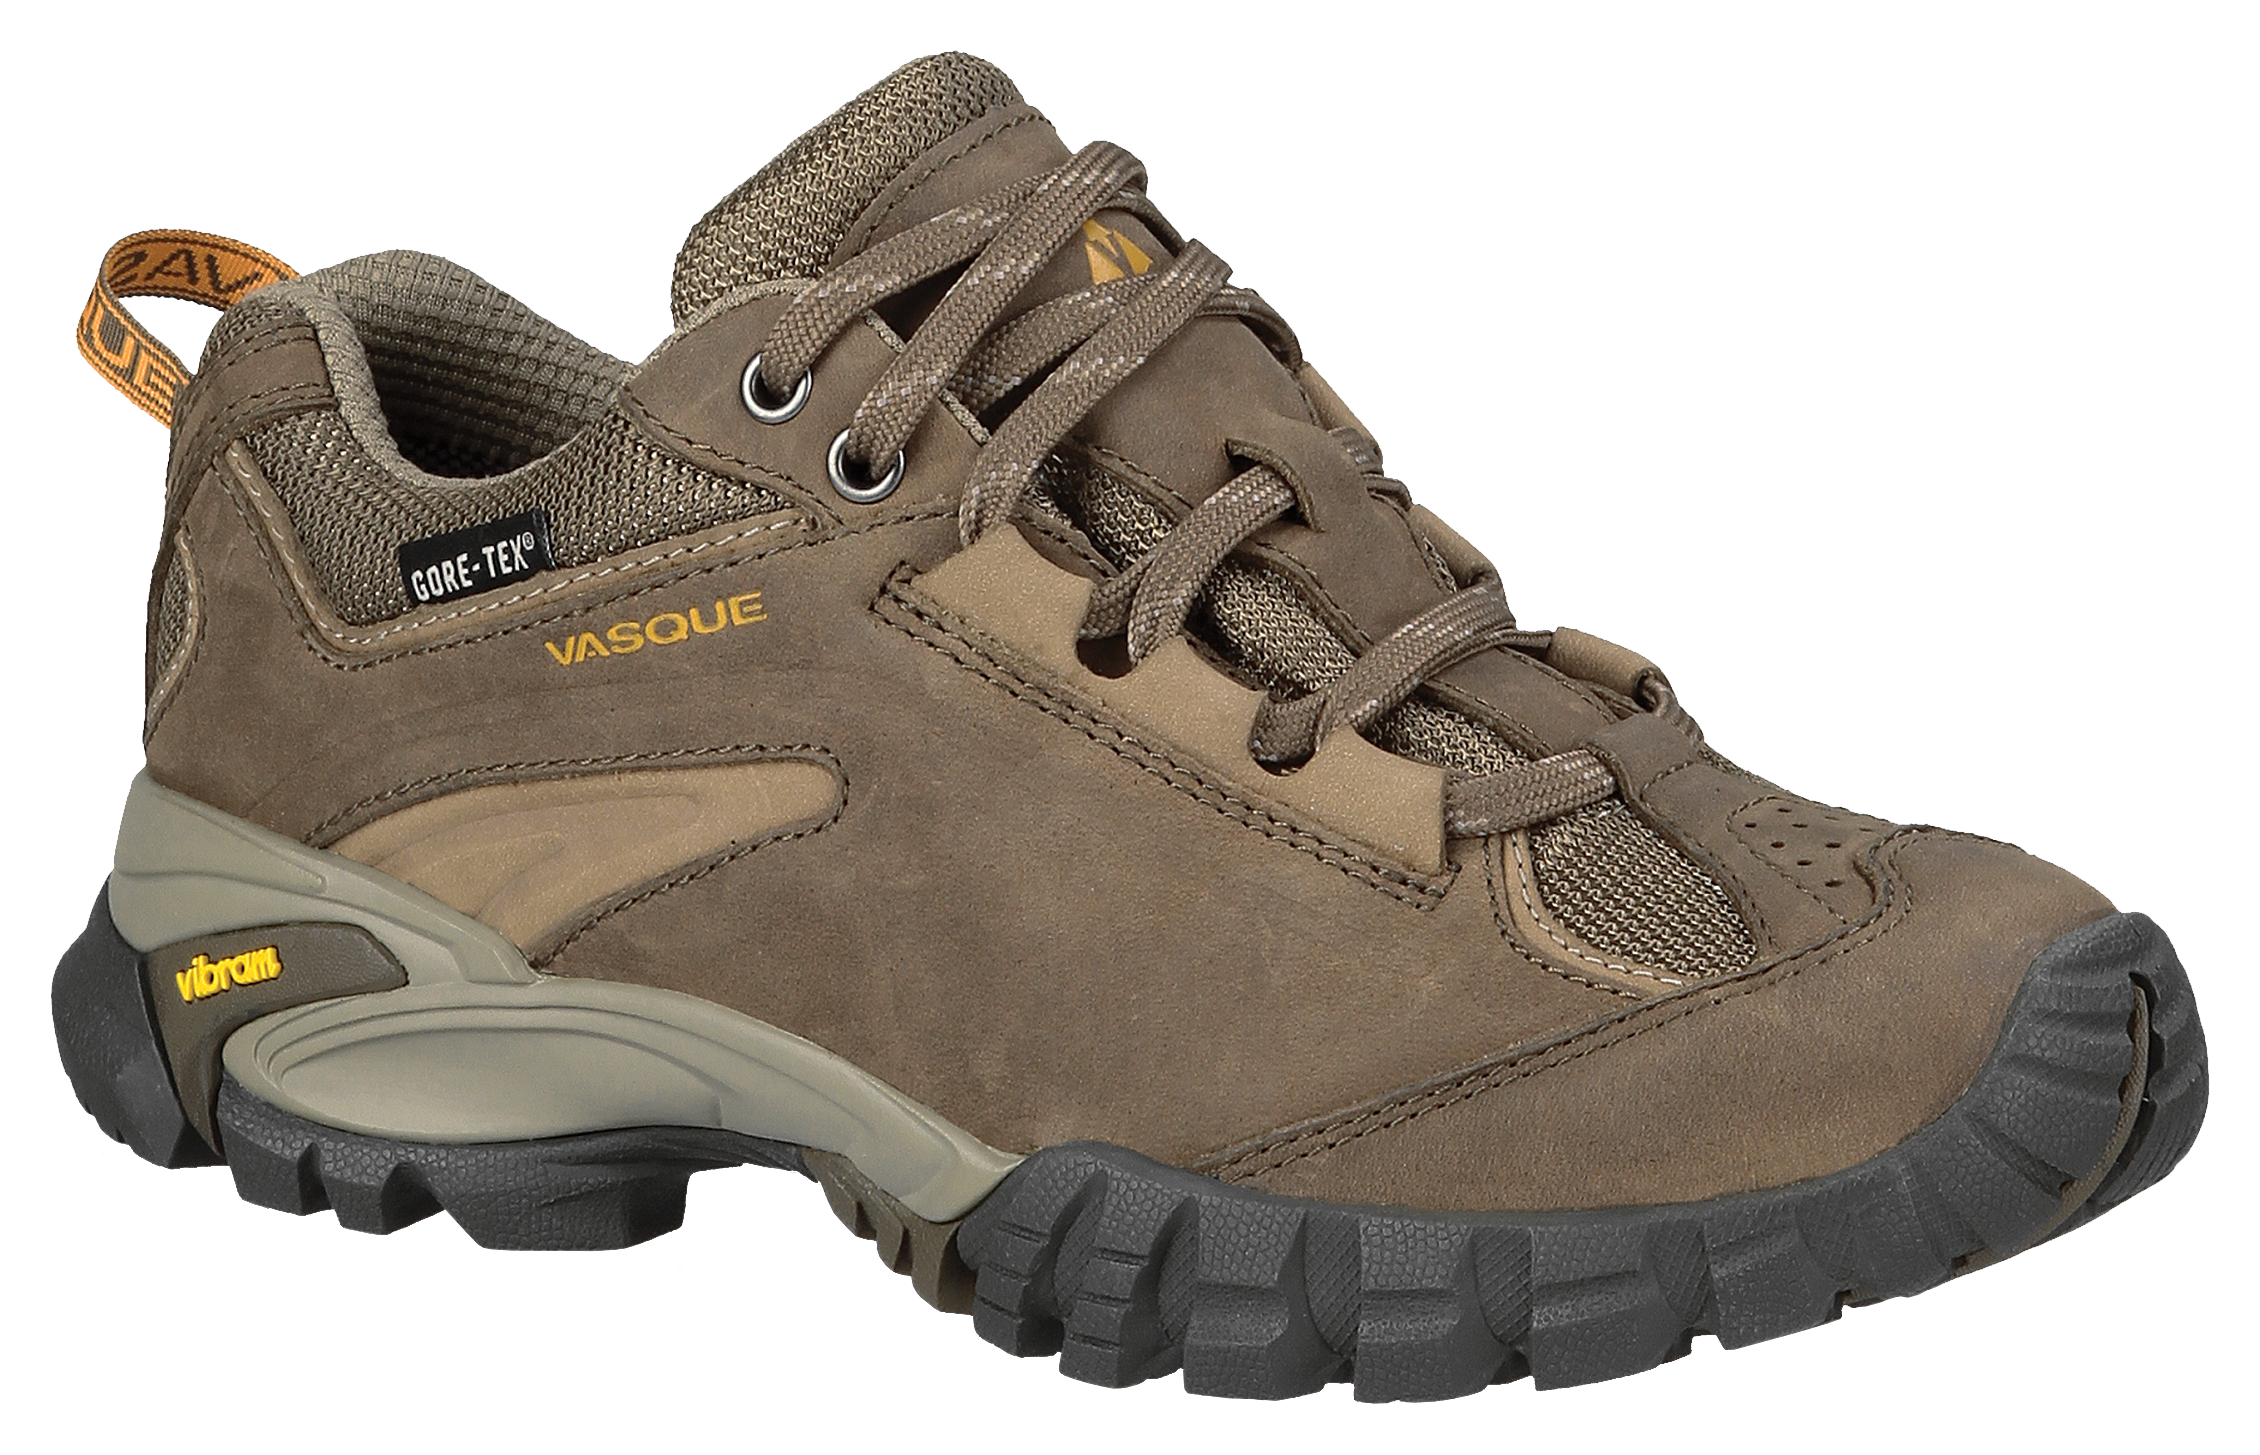 Vasque Mantra 2.0 GTX GORE-TEX Hiking Shoes for Ladies | Bass Pro Shops